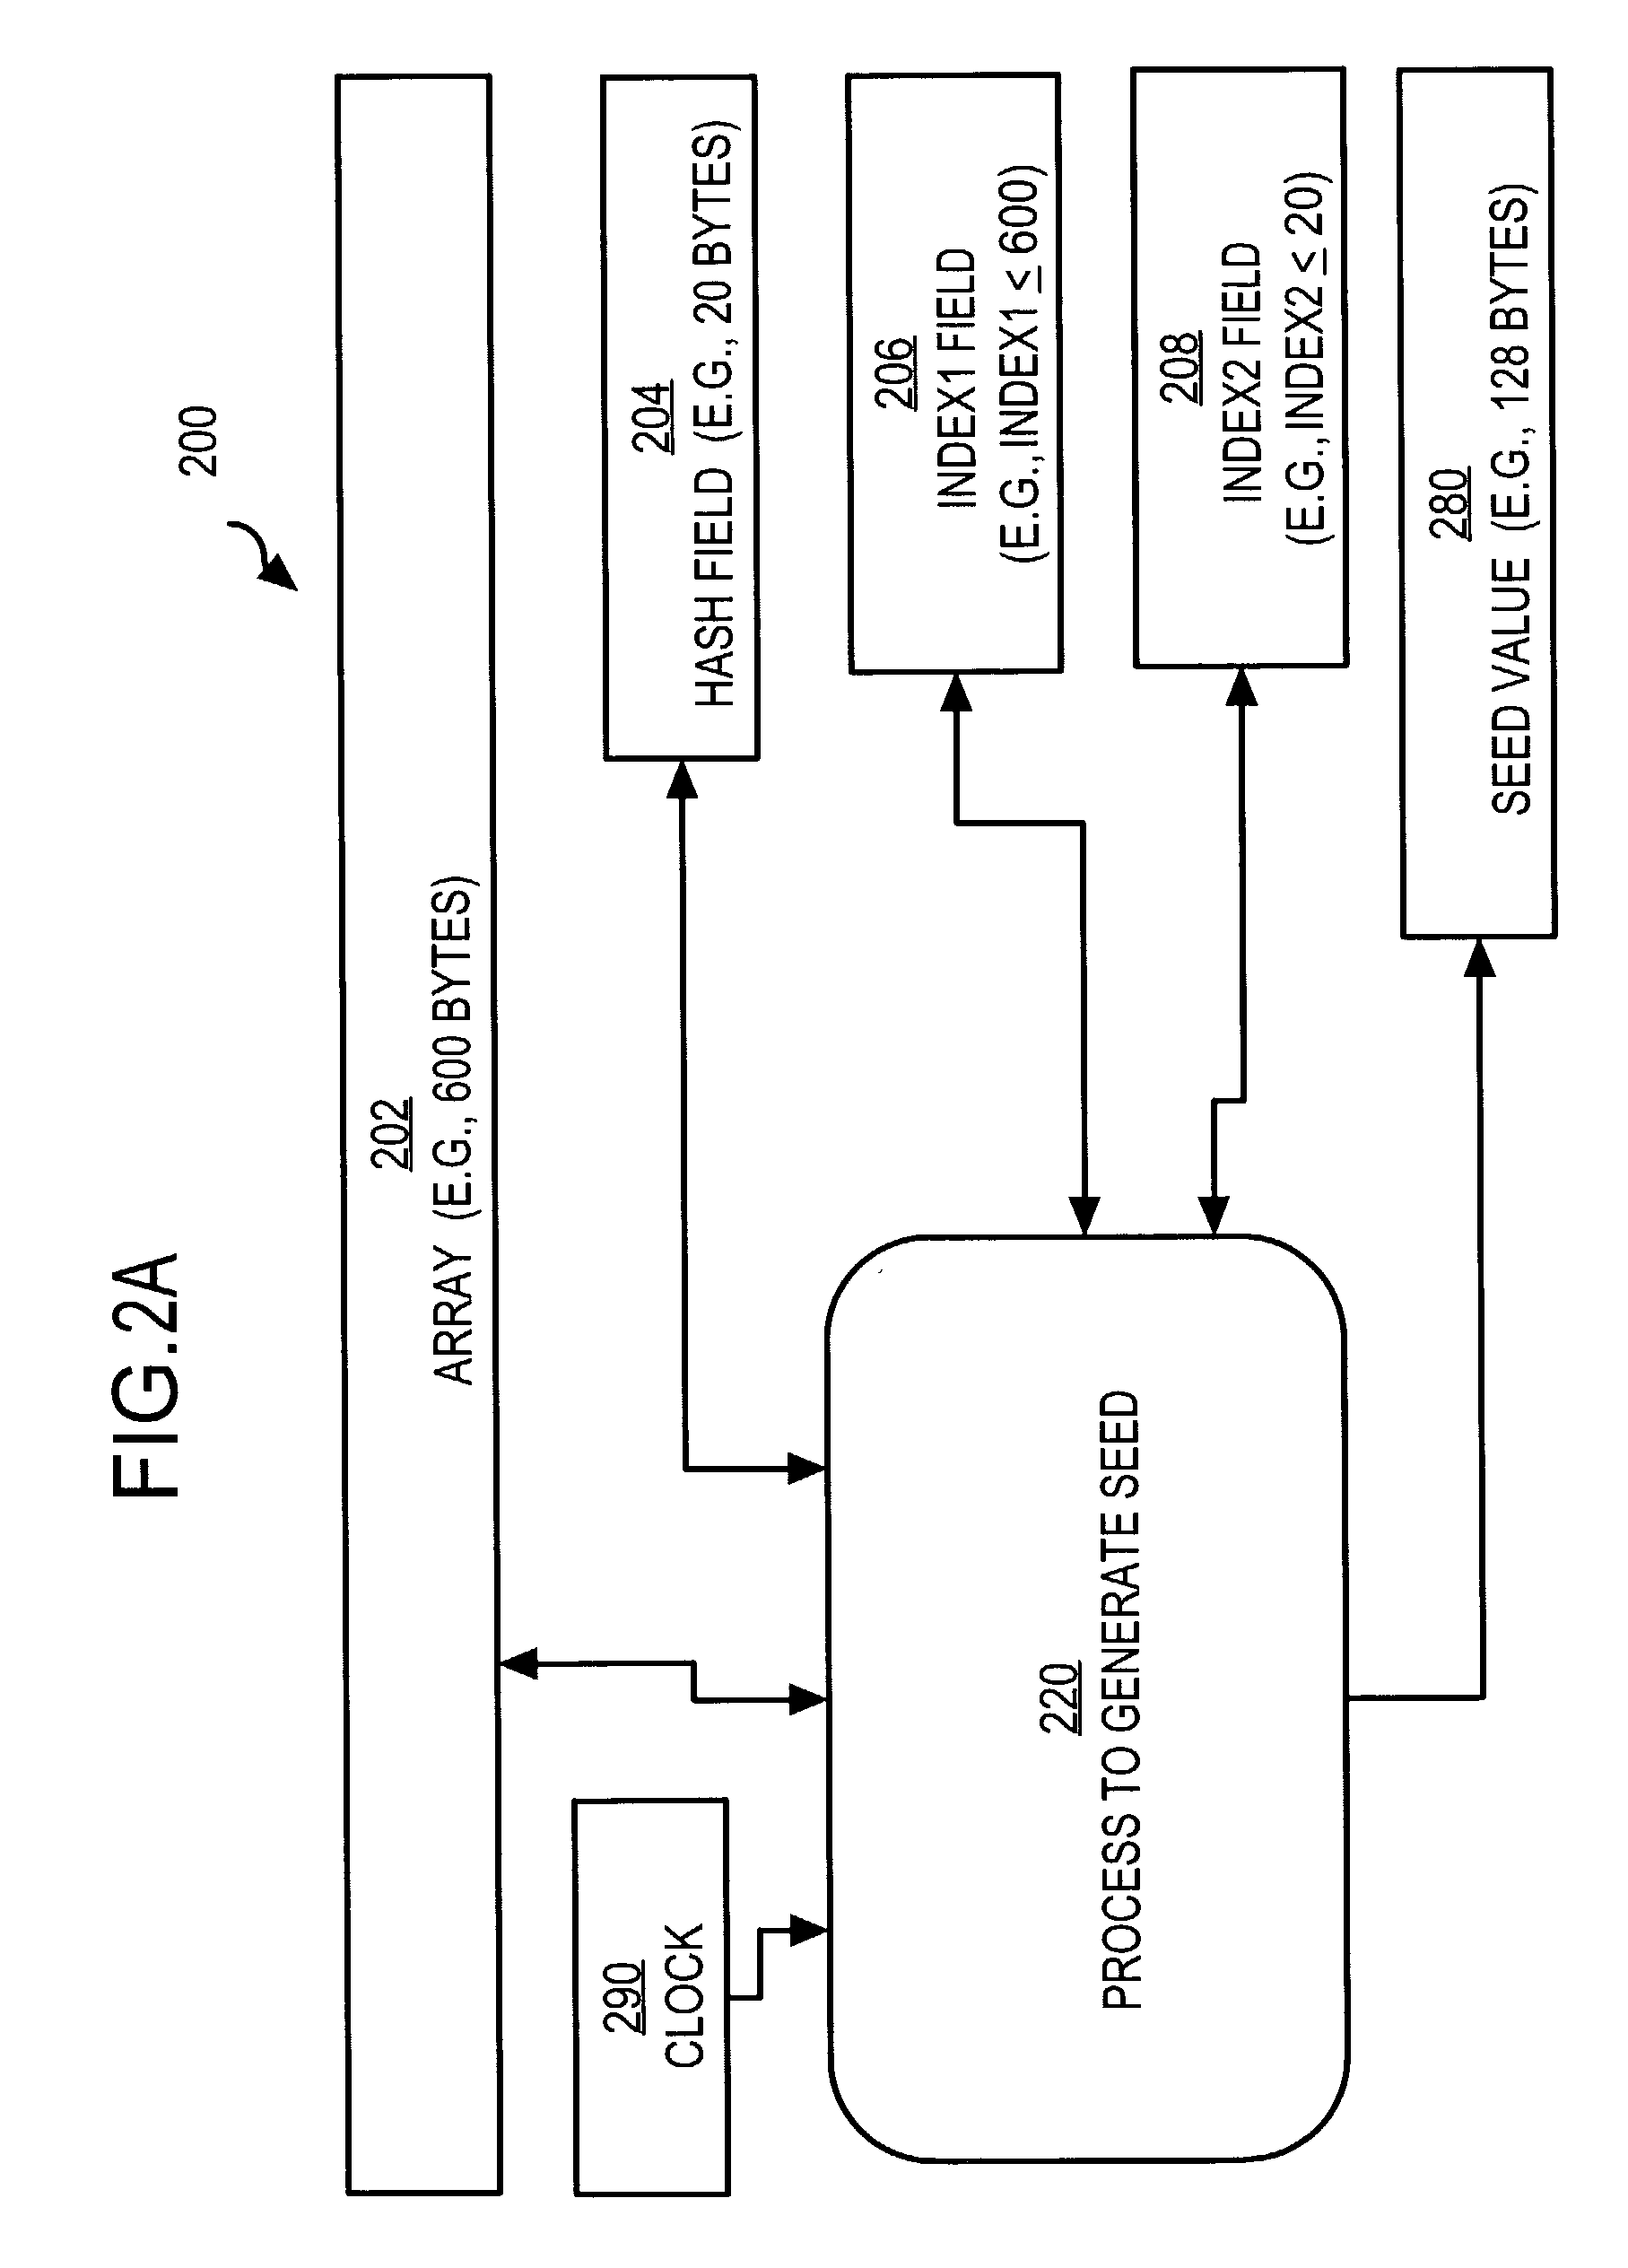 System and method for generating encryption seed values